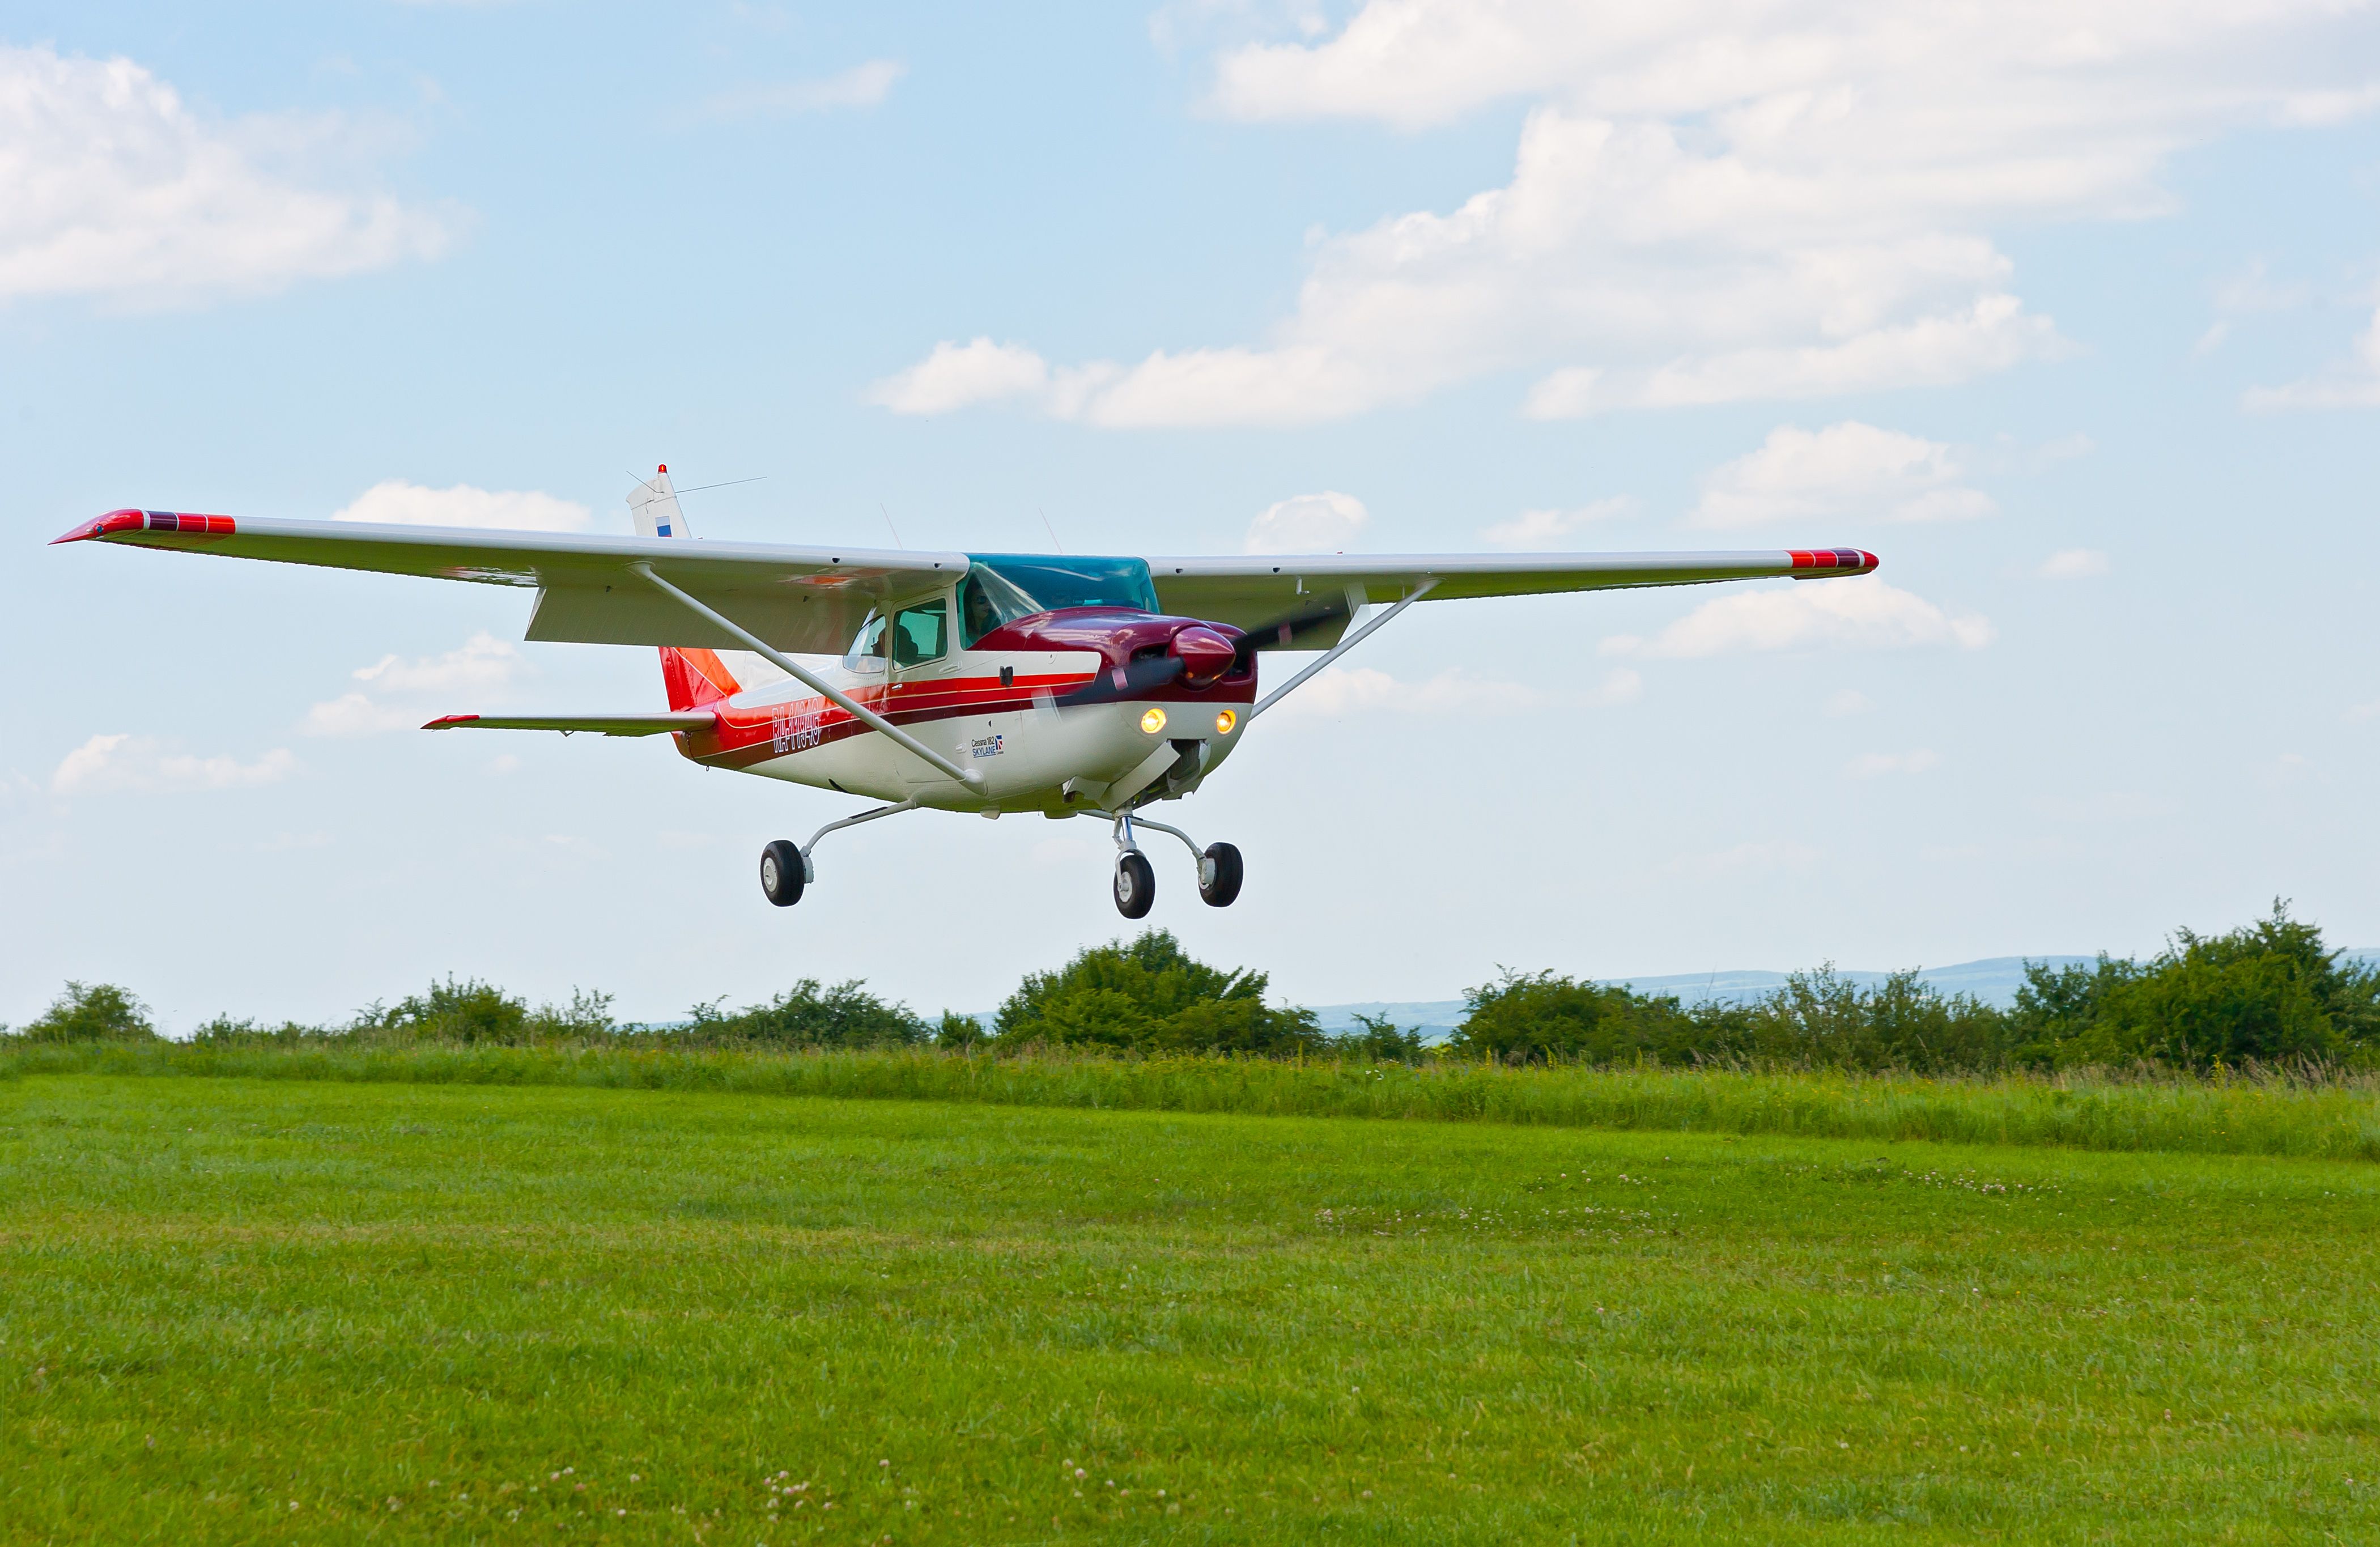 A private small aircraft landing on a grass runway. 